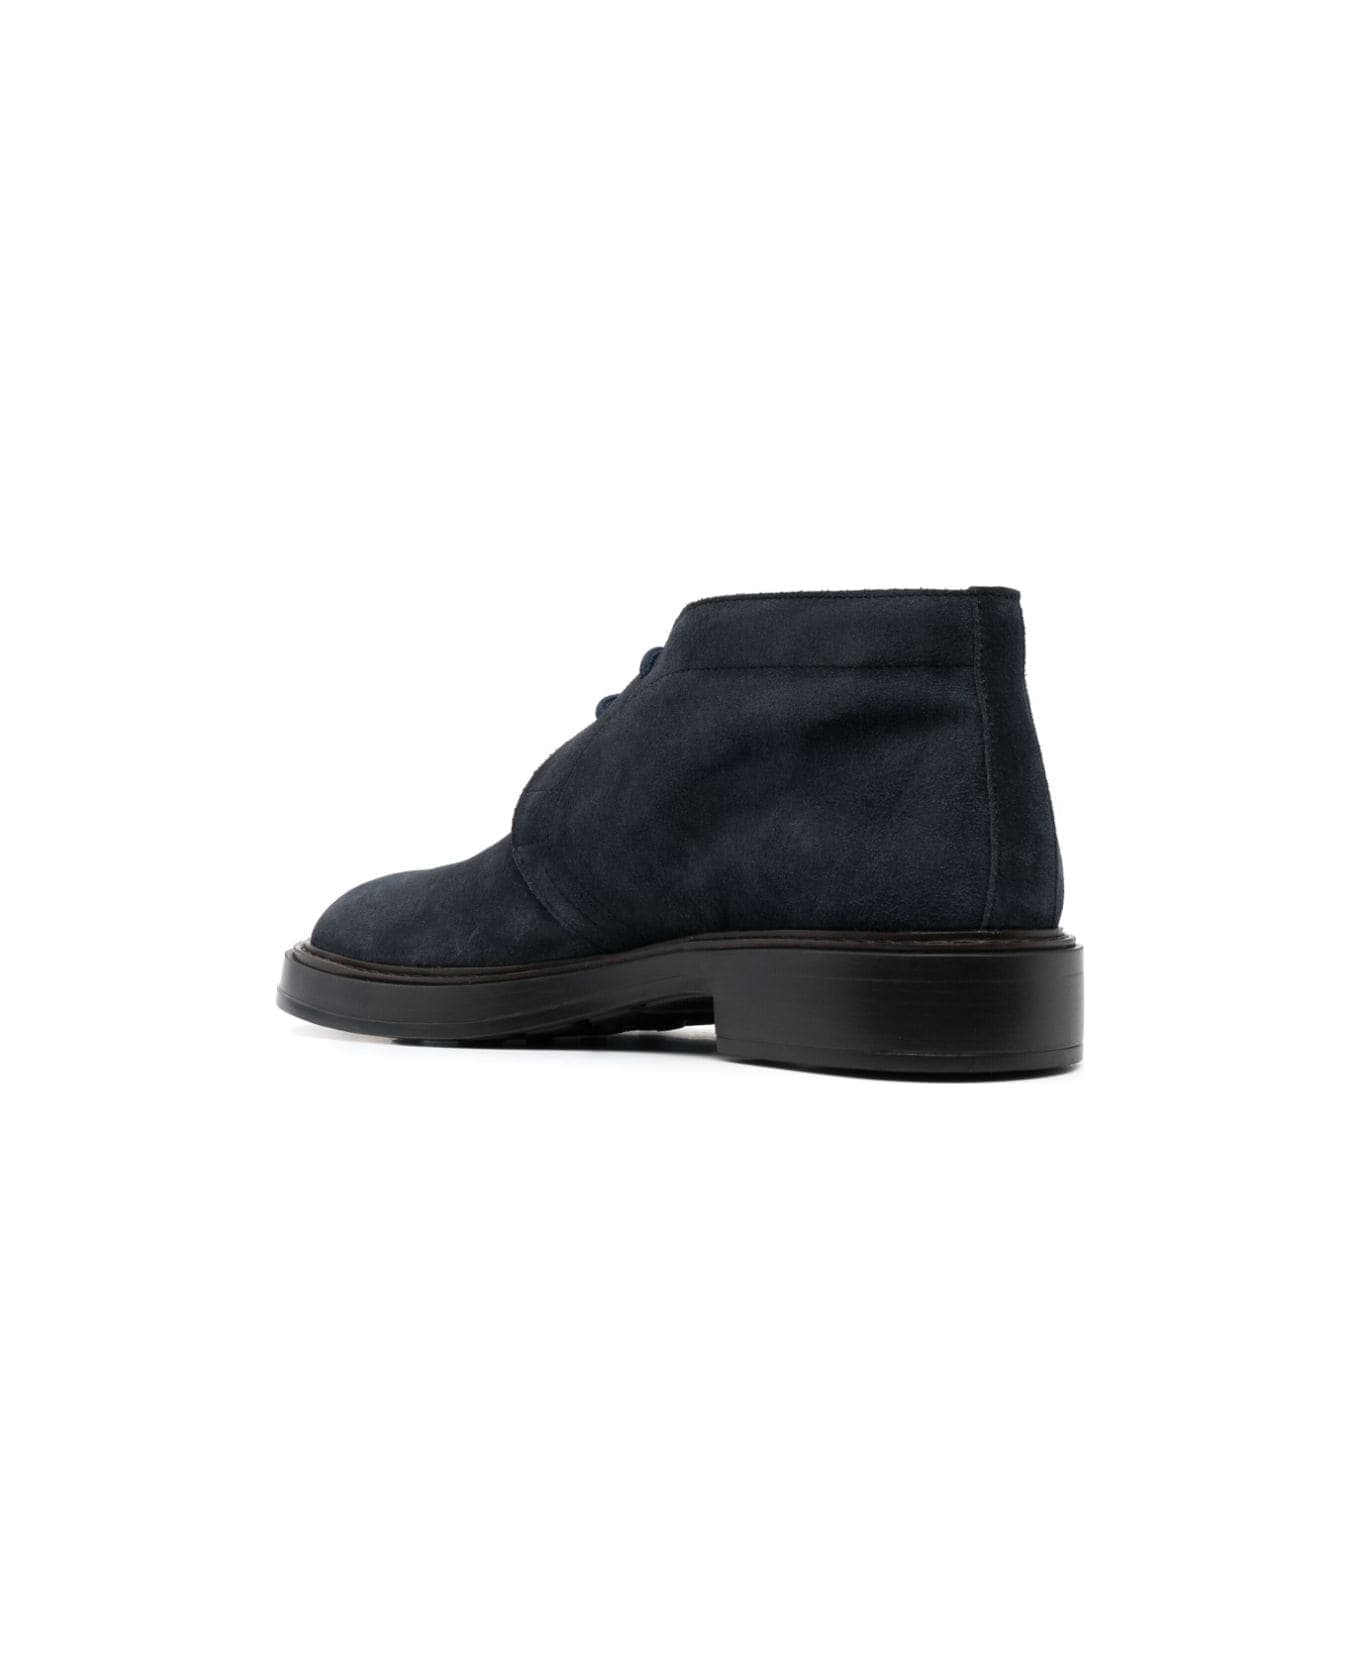 Tod's Extralight 61k Ankle Boots - Black